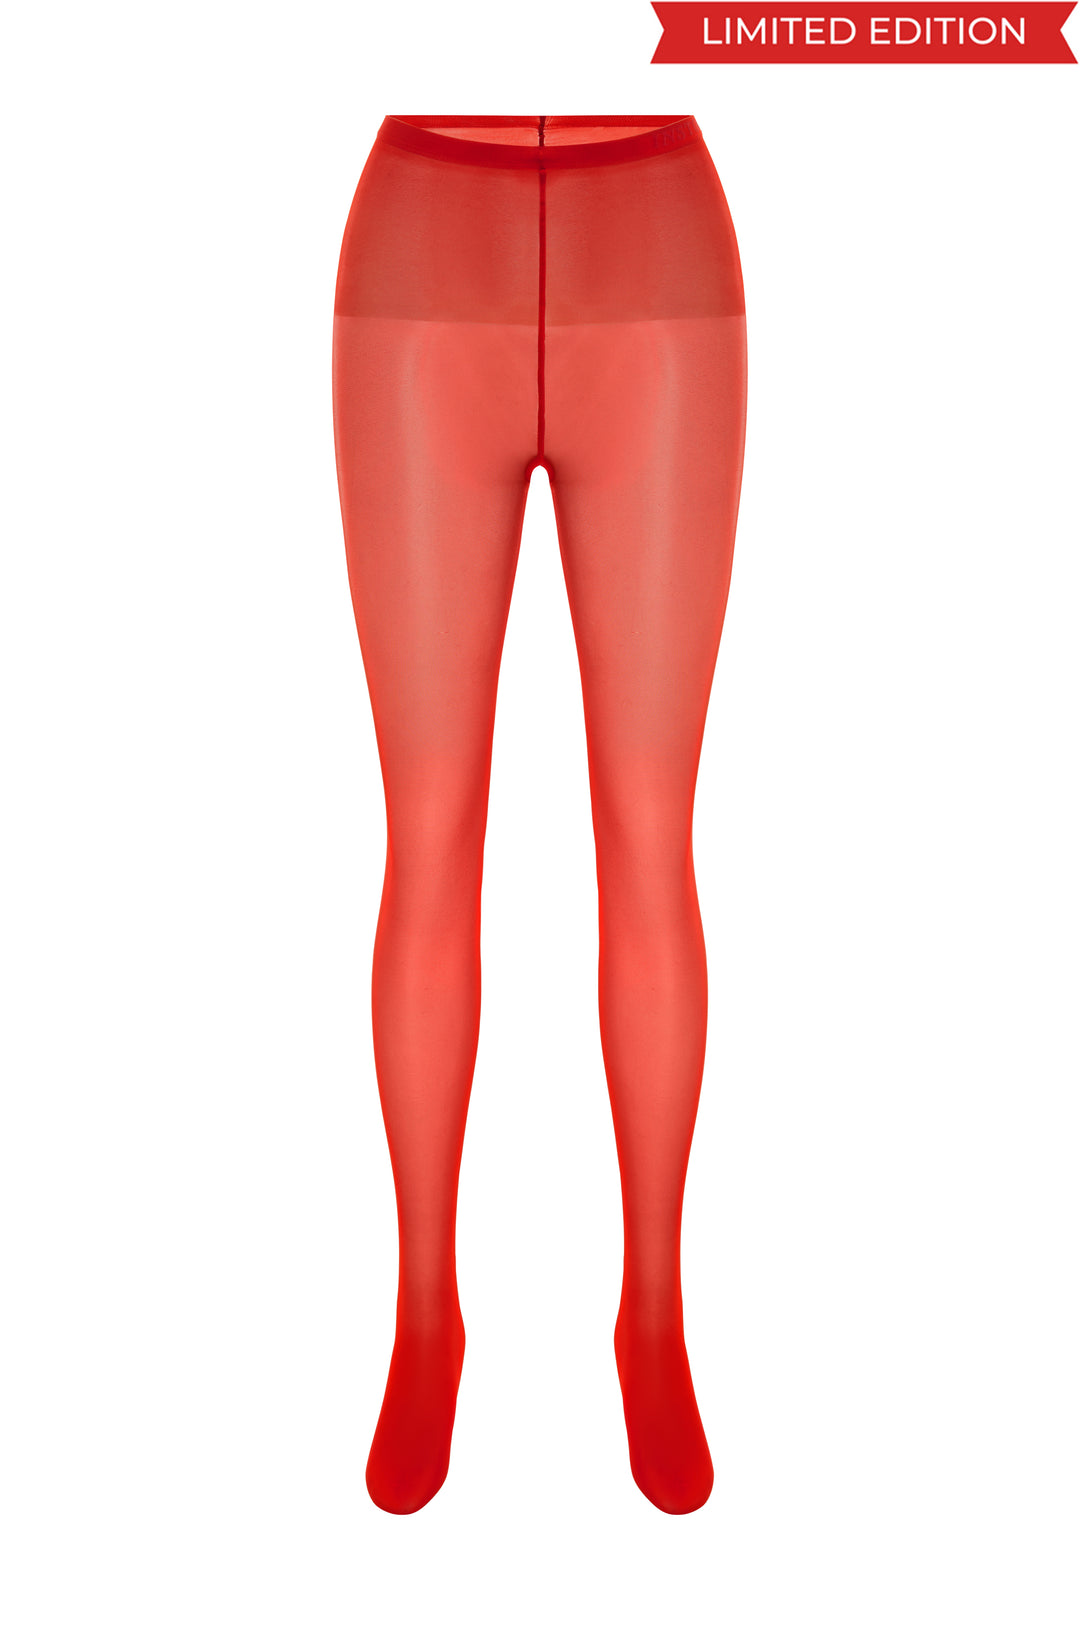 Cherry Red - Limited Edition Tights – INSTOCK